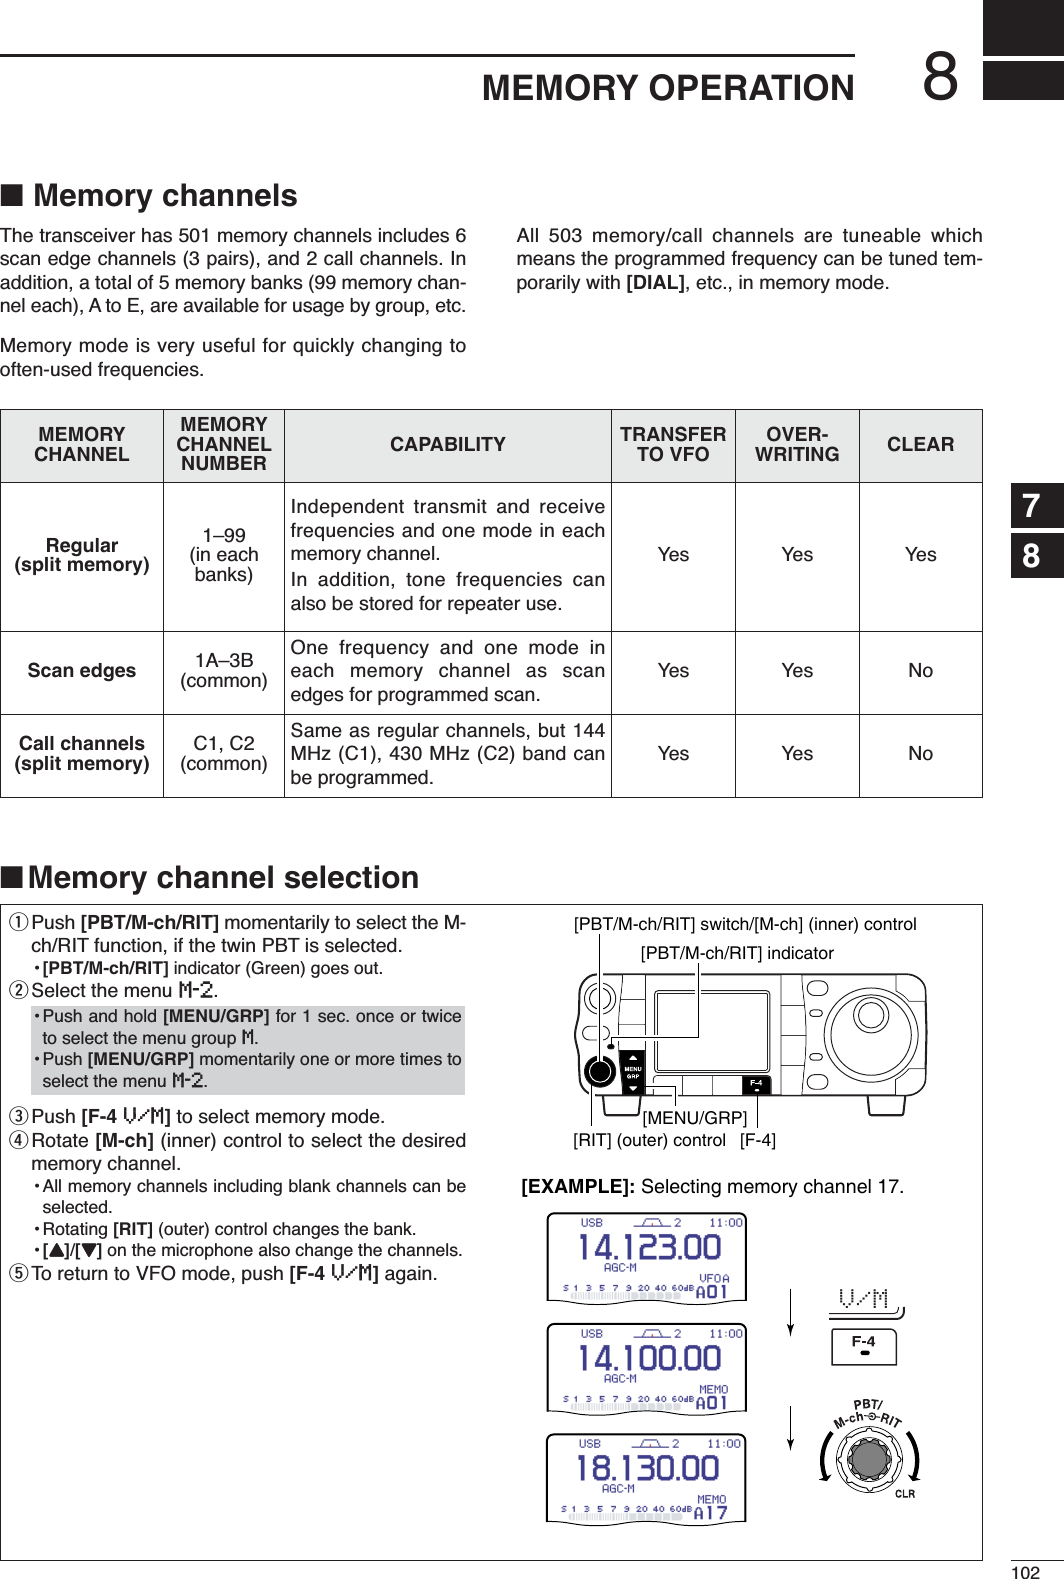 ■Memory channel selection8102MEMORY OPERATIONThe transceiver has 501 memory channels includes 6scan edge channels (3 pairs), and 2 call channels. Inaddition, a total of 5 memory banks (99 memory chan-nel each), A to E, are available for usage by group, etc.Memory mode is very useful for quickly changing tooften-used frequencies.All 503 memory/call channels are tuneable whichmeans the programmed frequency can be tuned tem-porarily with [DIAL], etc., in memory mode.MEMORYCHANNELMEMORYCHANNELNUMBERCAPABILITY TRANSFERTO VFOOVER-WRITING CLEARRegular(split memory)1–99(in eachbanks)Independent transmit and receivefrequencies and one mode in eachmemory channel.In addition, tone frequencies canalso be stored for repeater use.Yes Yes YesScan edges 1A–3B(common)One frequency and one mode ineach memory channel as scanedges for programmed scan.Yes Yes NoCall channels(split memory)C1, C2(common)Same as regular channels, but 144MHz (C1), 430 MHz (C2) band canbe programmed.Yes Yes No■Memory channelsqPush [PBT/M-ch/RIT] momentarily to select the M-ch/RIT function, if the twin PBT is selected.•[PBT/M-ch/RIT] indicator (Green) goes out.wSelect the menu M-2.ePush [F-4 V/M]to select memory mode.rRotate [M-ch] (inner) control to select the desiredmemory channel.•All memory channels including blank channels can beselected.•Rotating [RIT] (outer) control changes the bank.•[Y]/[Z]on the microphone also change the channels.tTo return to VFO mode, push [F-4 V/M]again.[EXAMPLE]: Selecting memory channel 17.V/M[MENU/GRP][F-4][RIT] (outer) control[PBT/M-ch/RIT] indicator[PBT/M-ch/RIT] switch/[M-ch] (inner) control•Push and hold [MENU/GRP] for 1 sec. once or twiceto select the menu group M.•Push [MENU/GRP] momentarily one or more times toselect the menu M-2.78